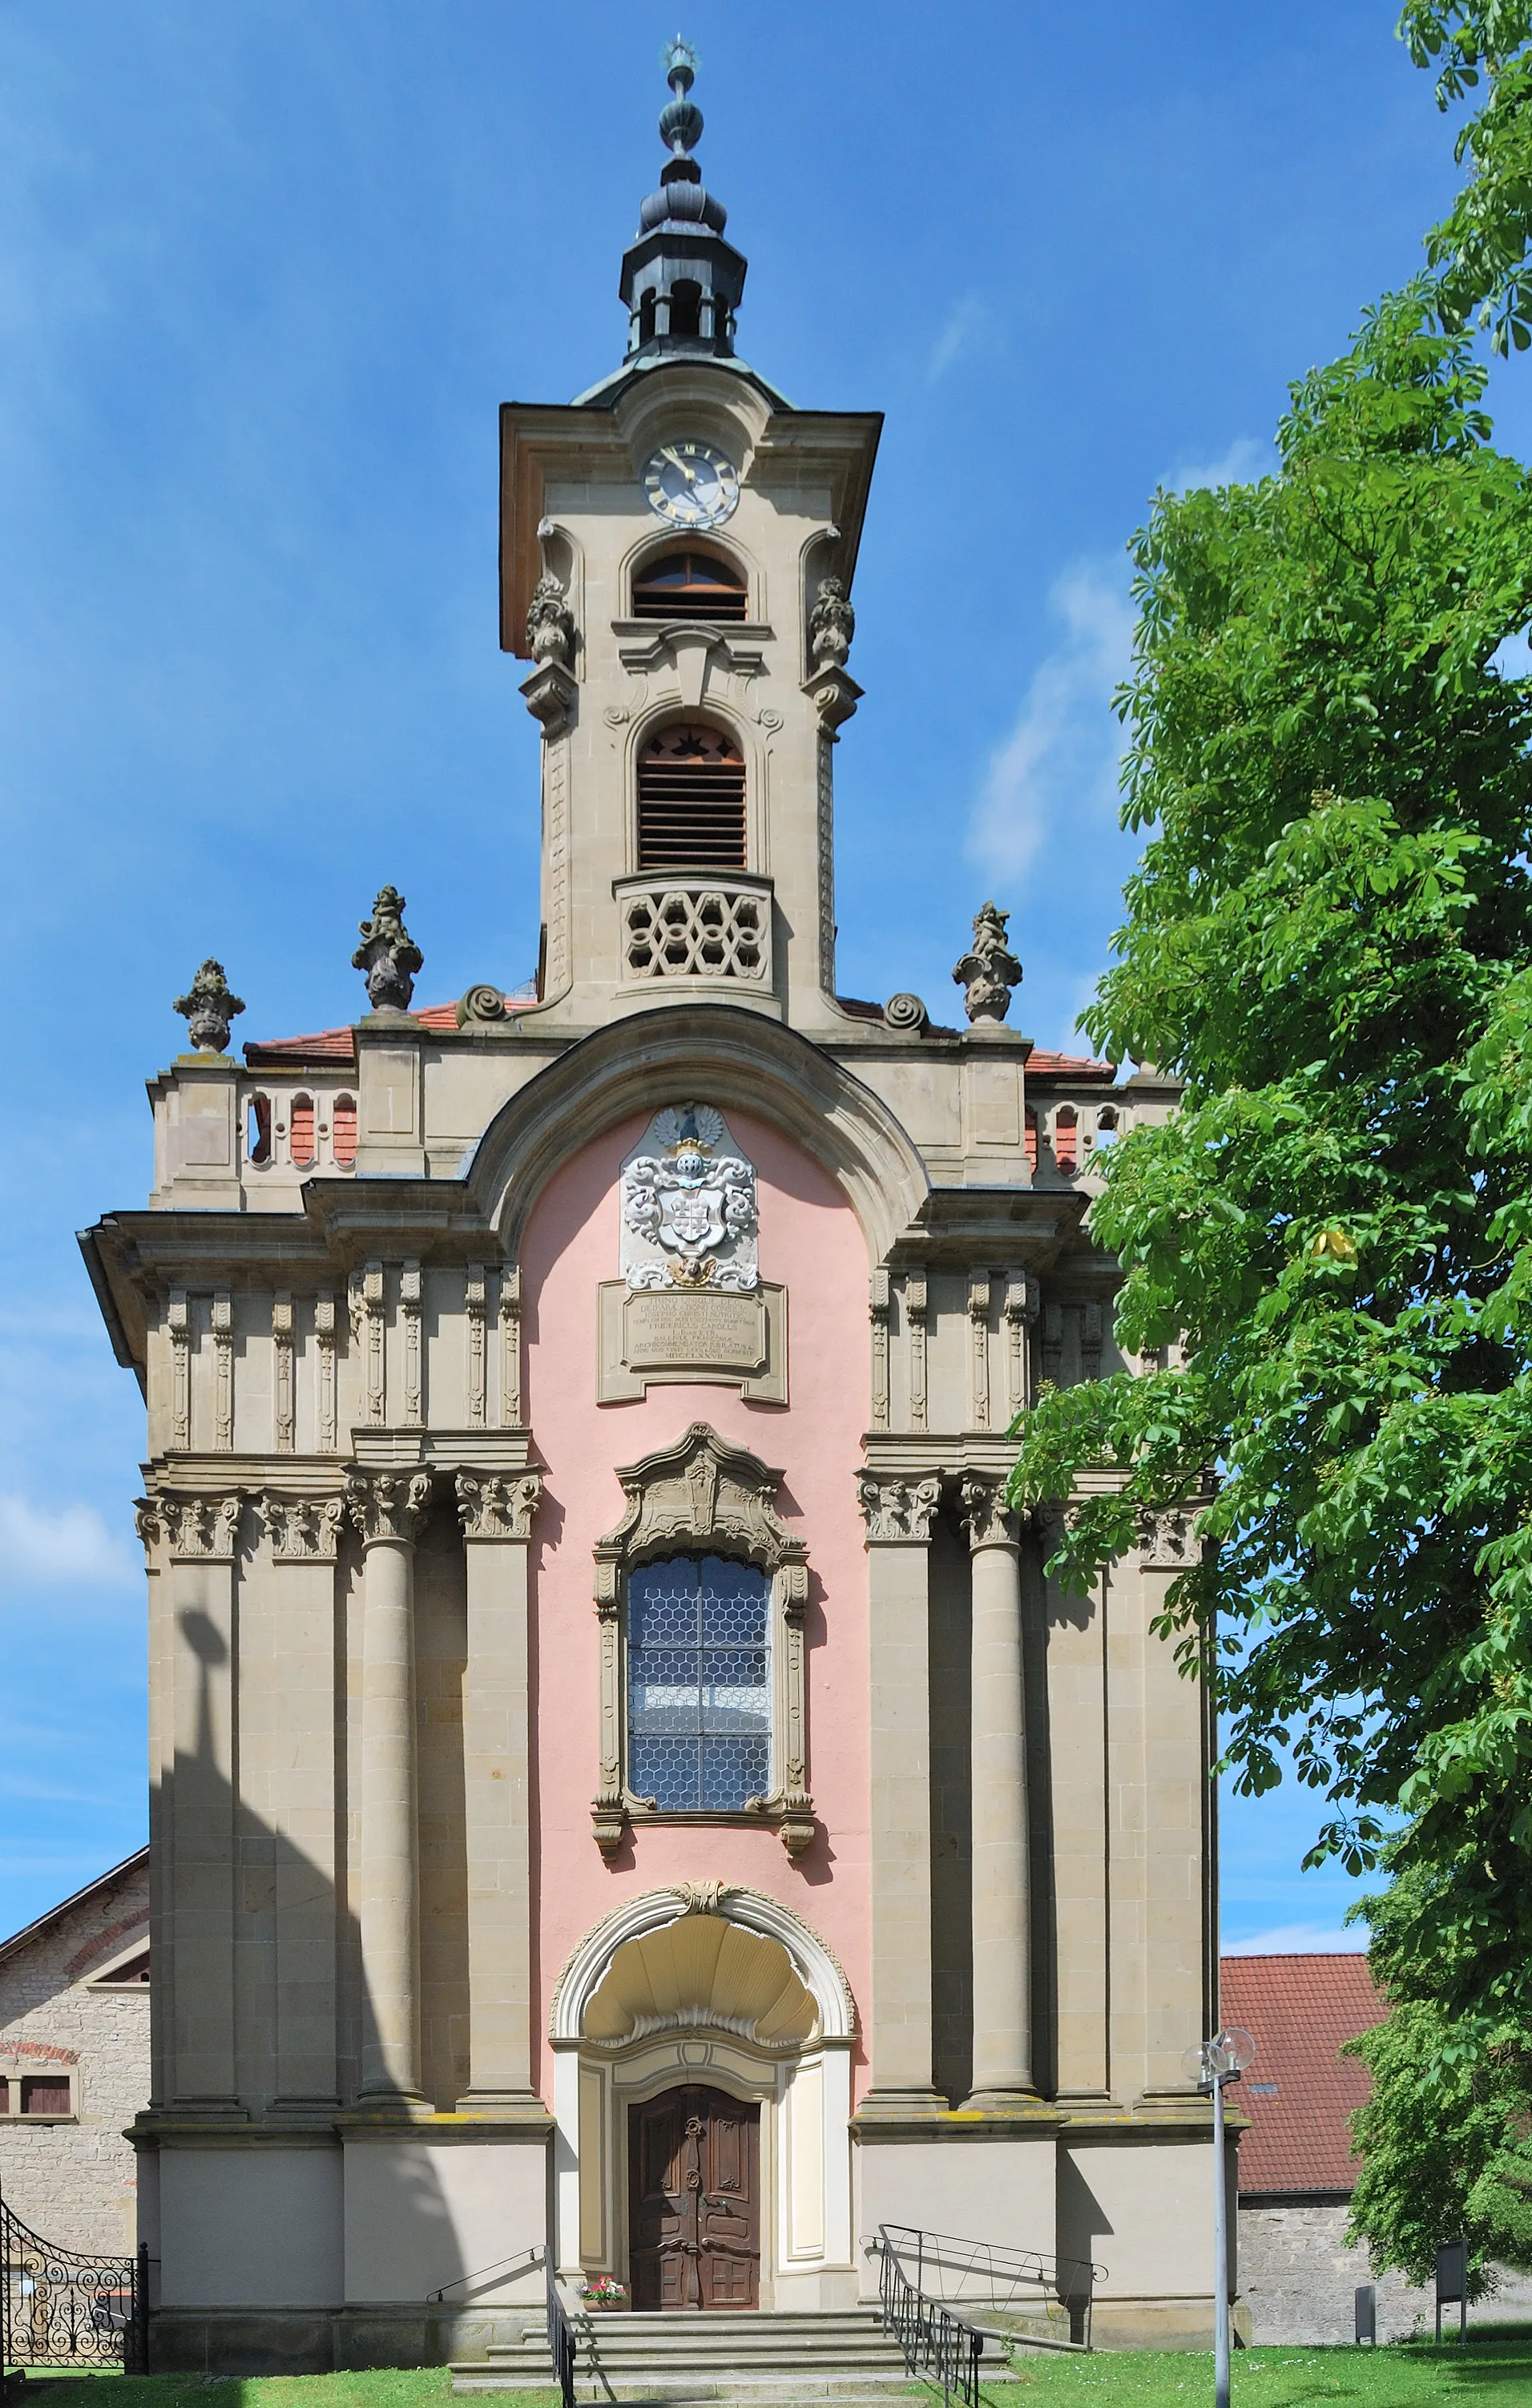 Photo showing: The Holy Trinity Church in Meßbach, Southern Germany.